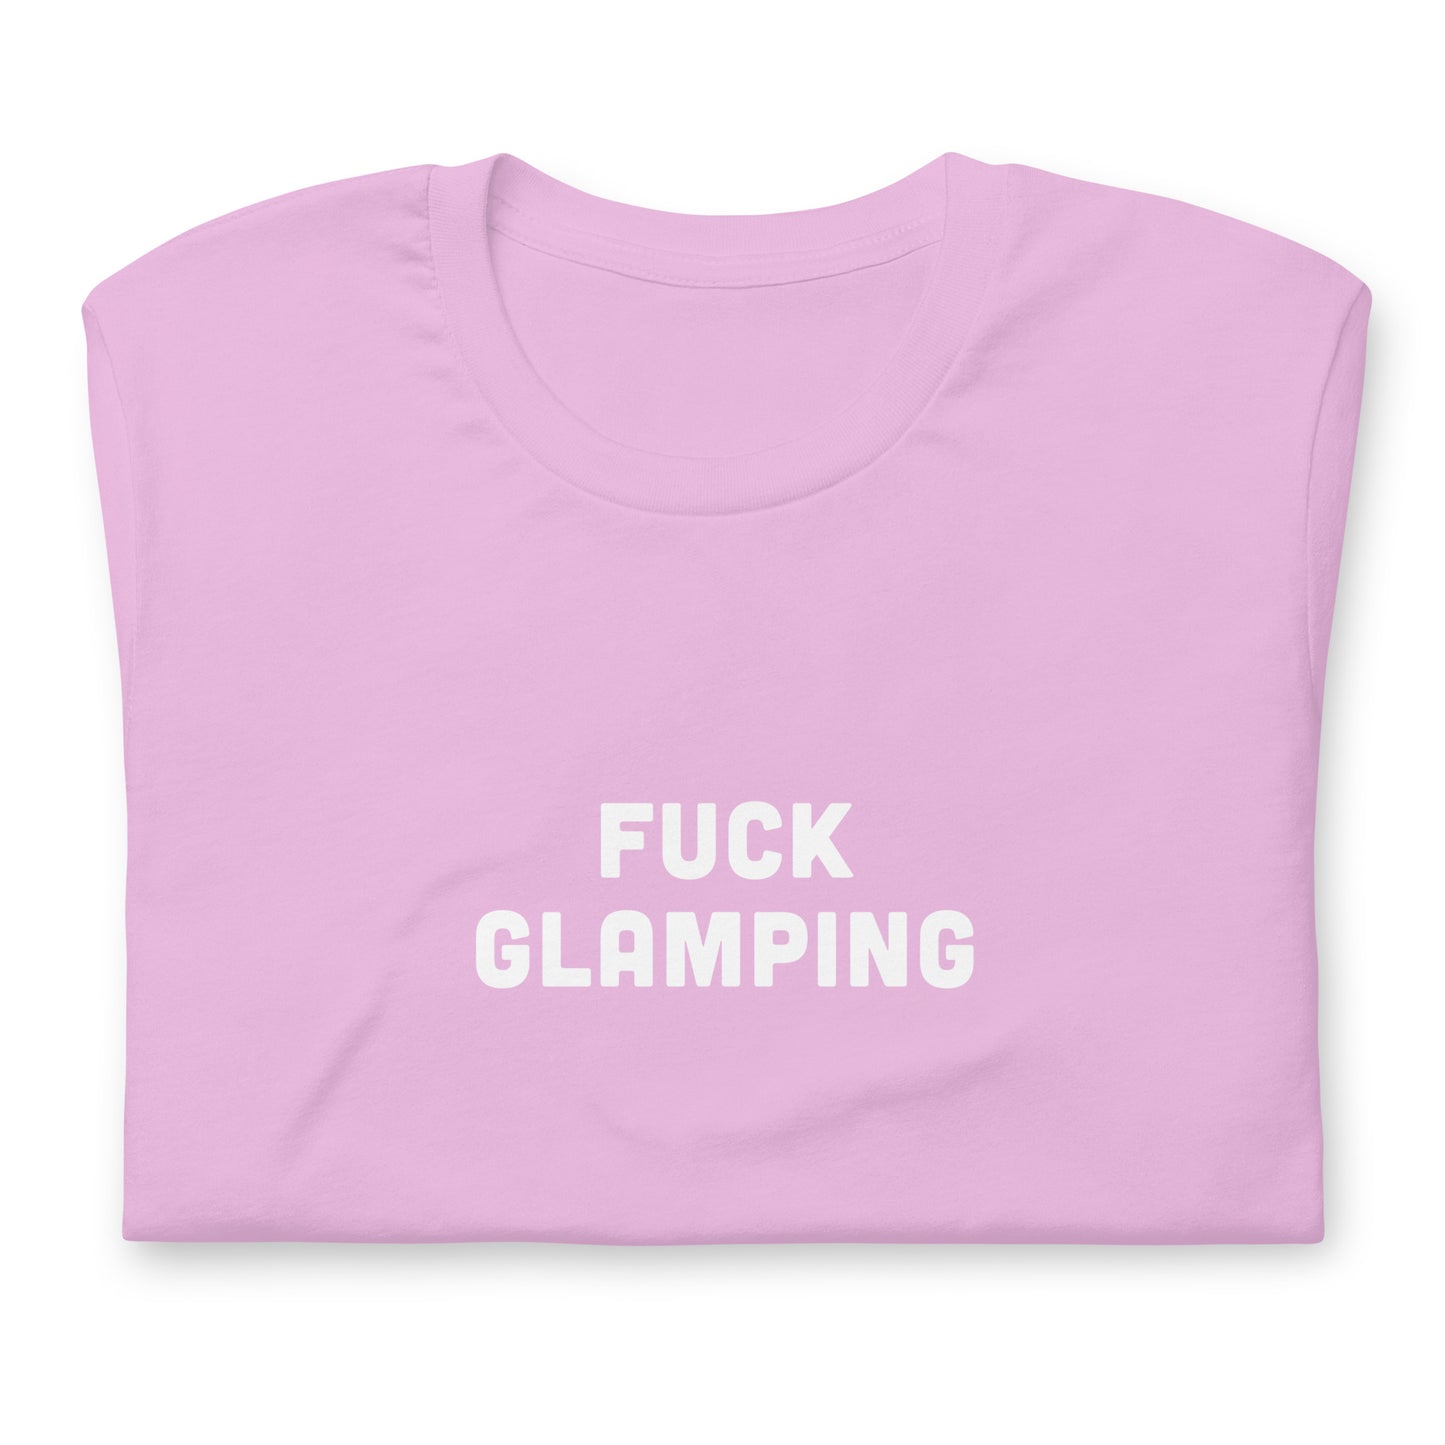 Fuck Glamping T-Shirt Size XL Color Forest